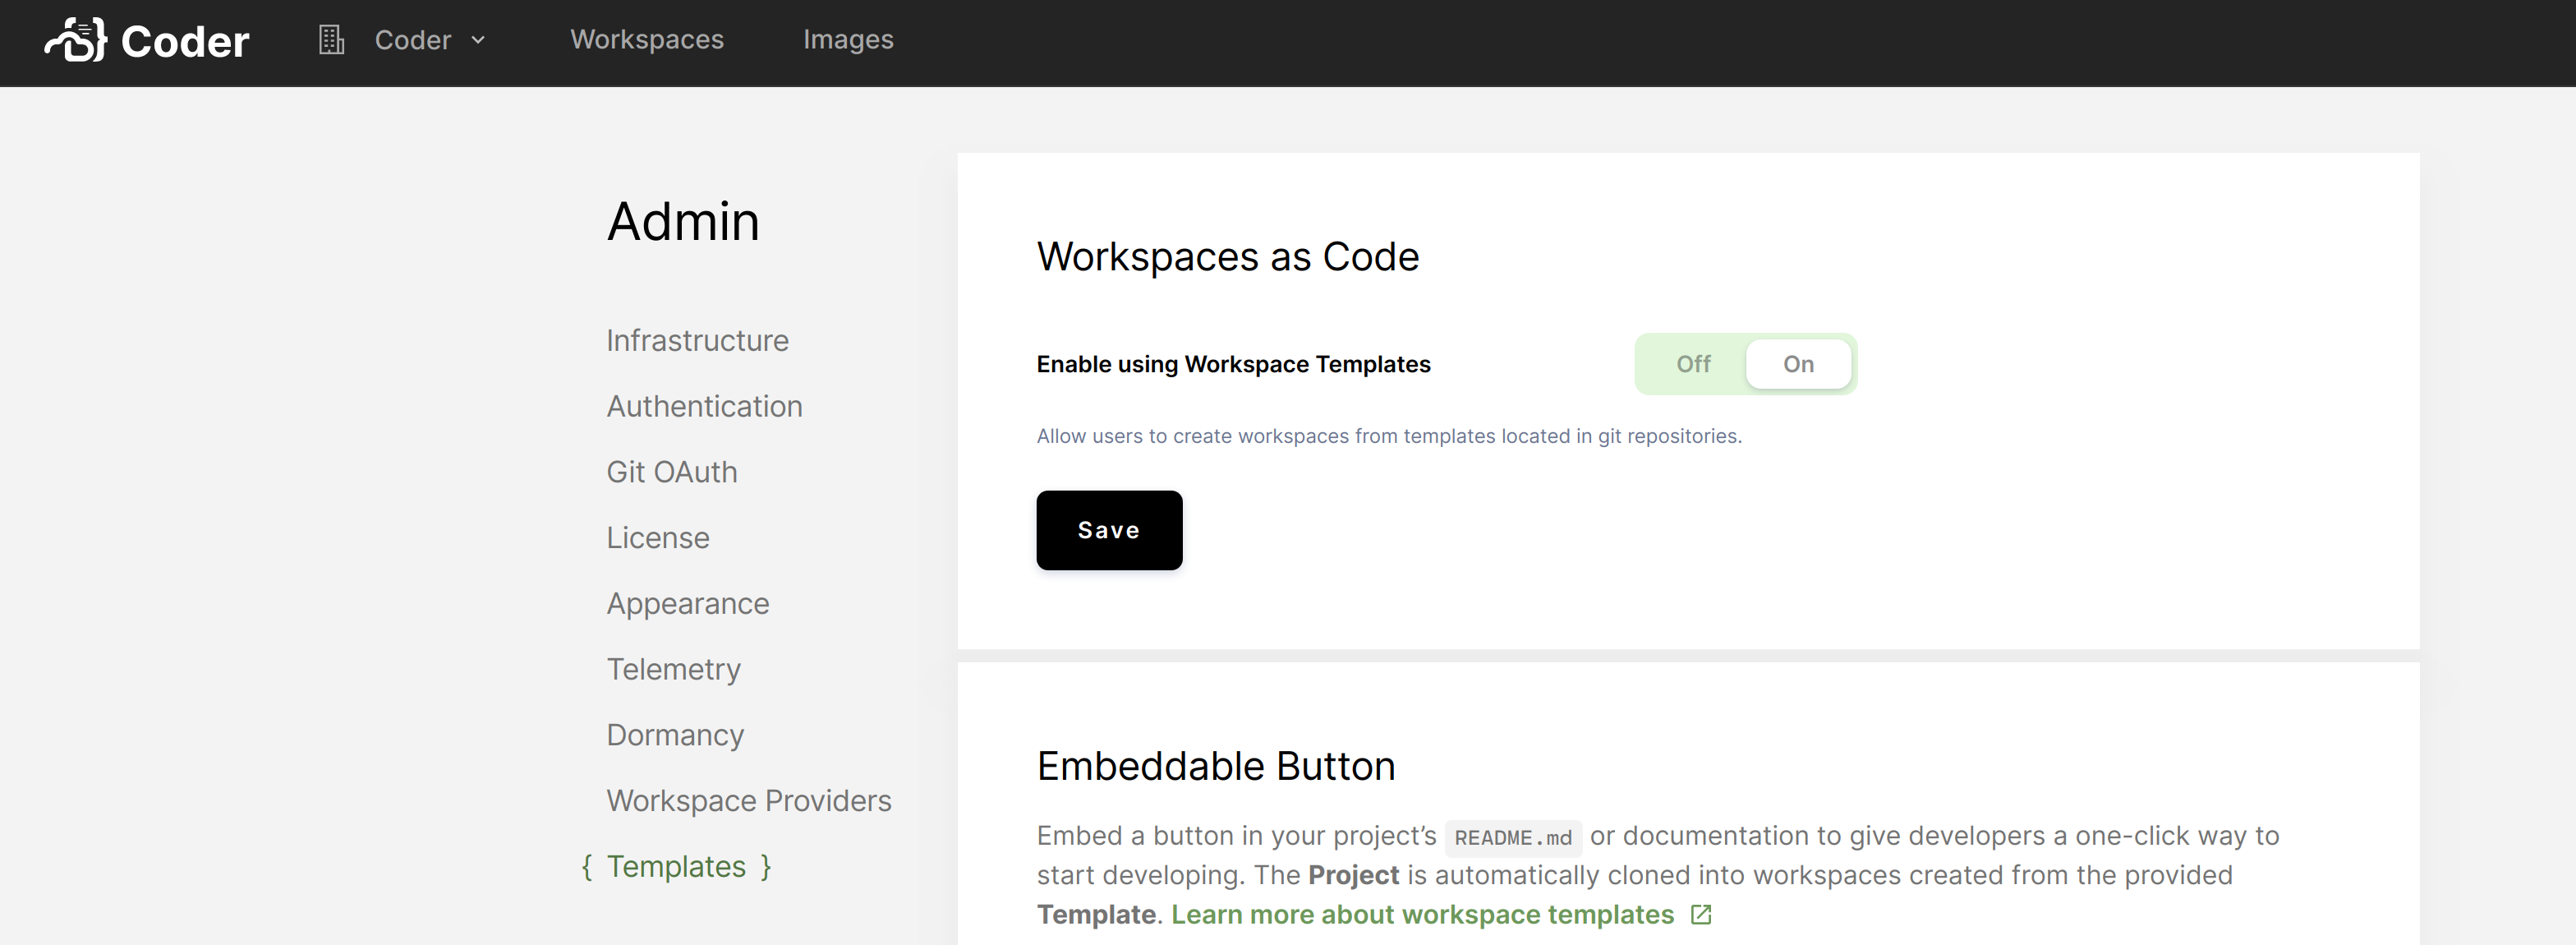 Toggle workspaces as code